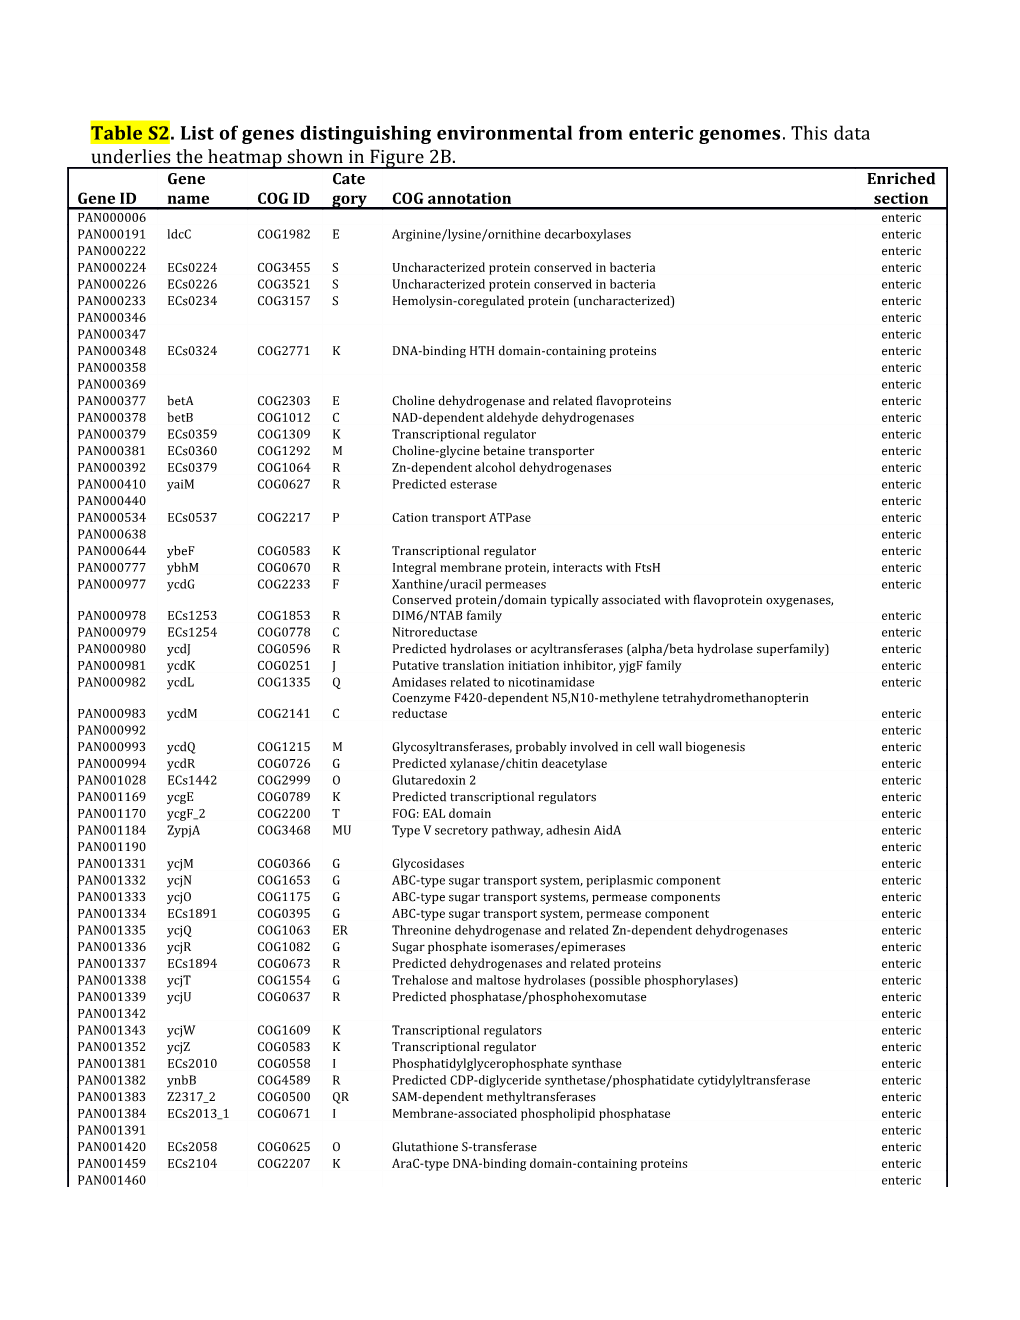 Table S2. List of Genes Distinguishing Environmental from Enteric Genomes . This Data